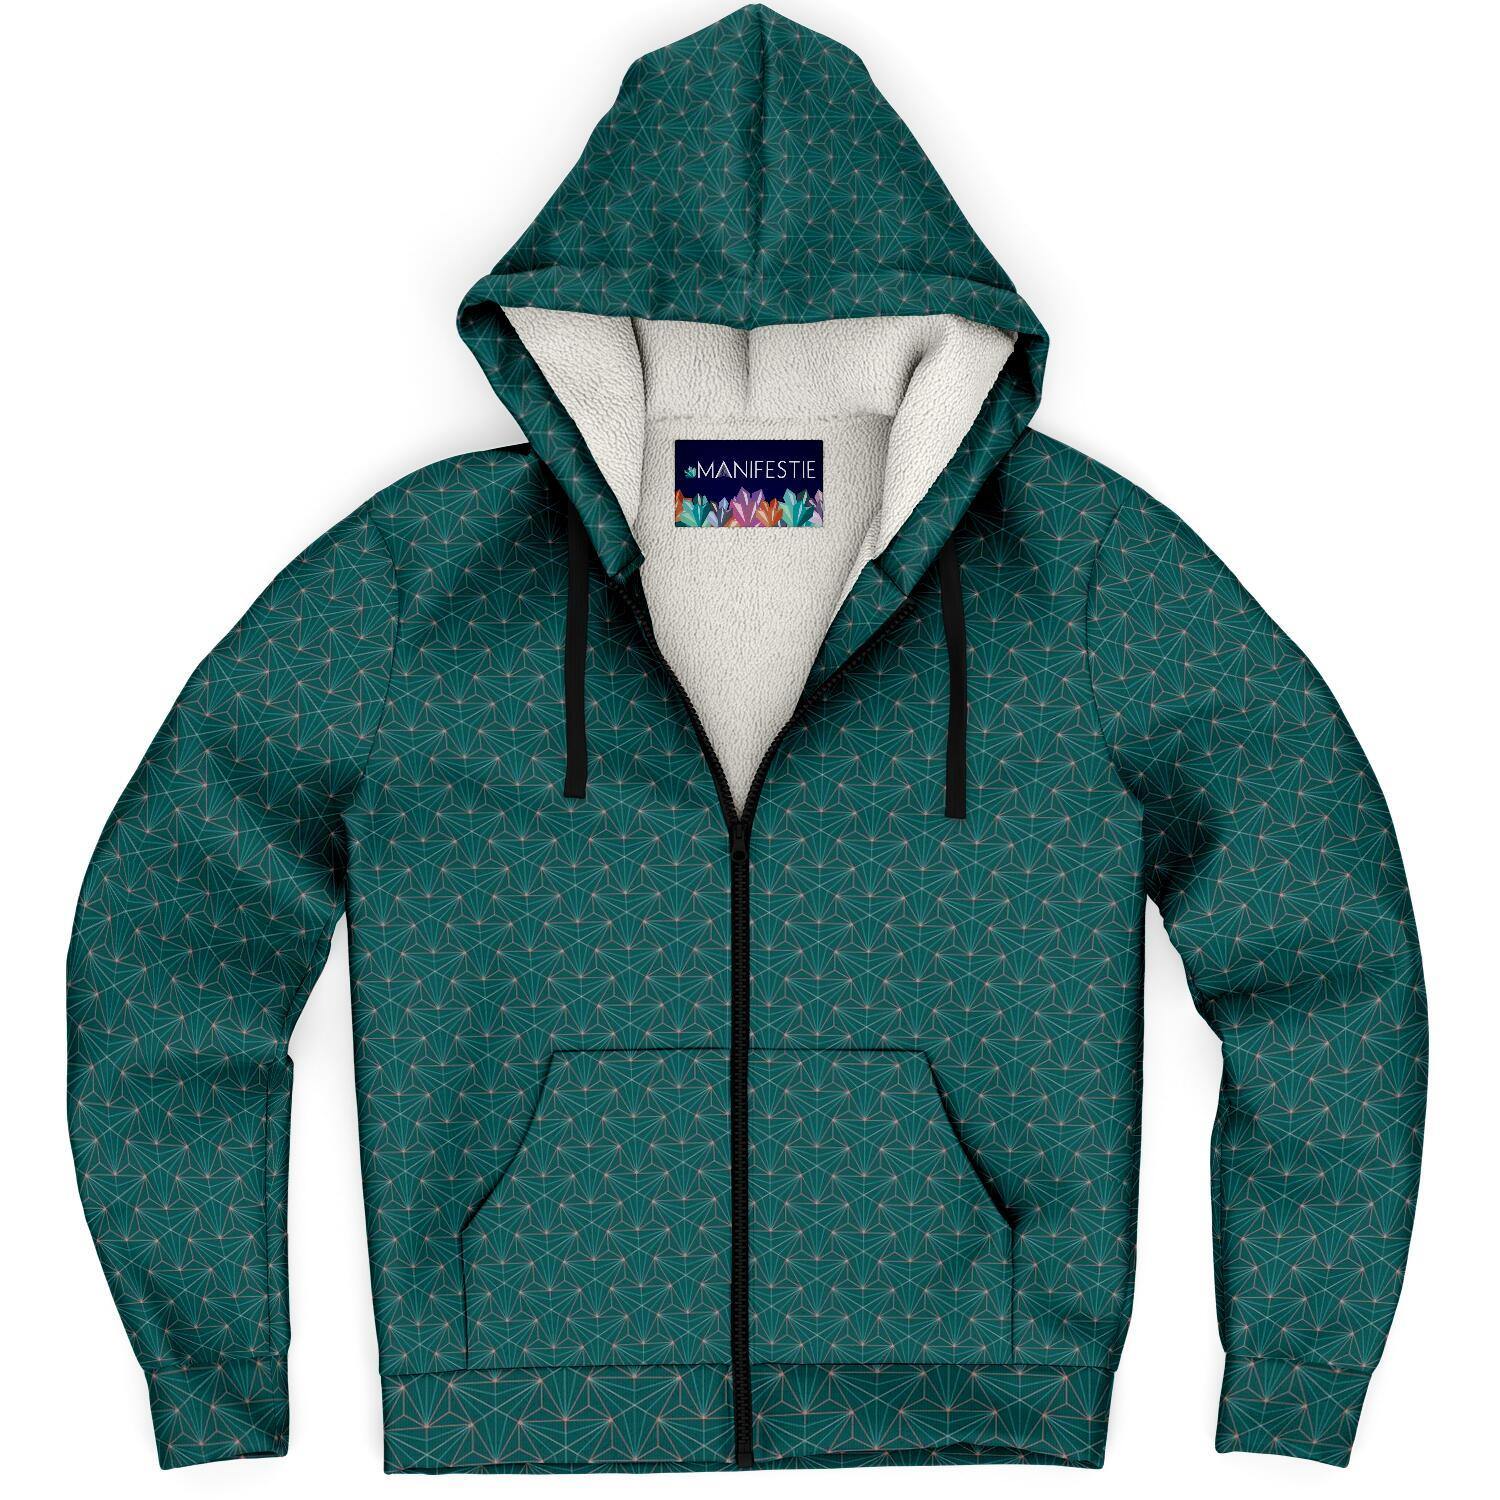 Turquoise Sacred Connections Premium Sherpa Lined Zip Hoodie - Manifestie